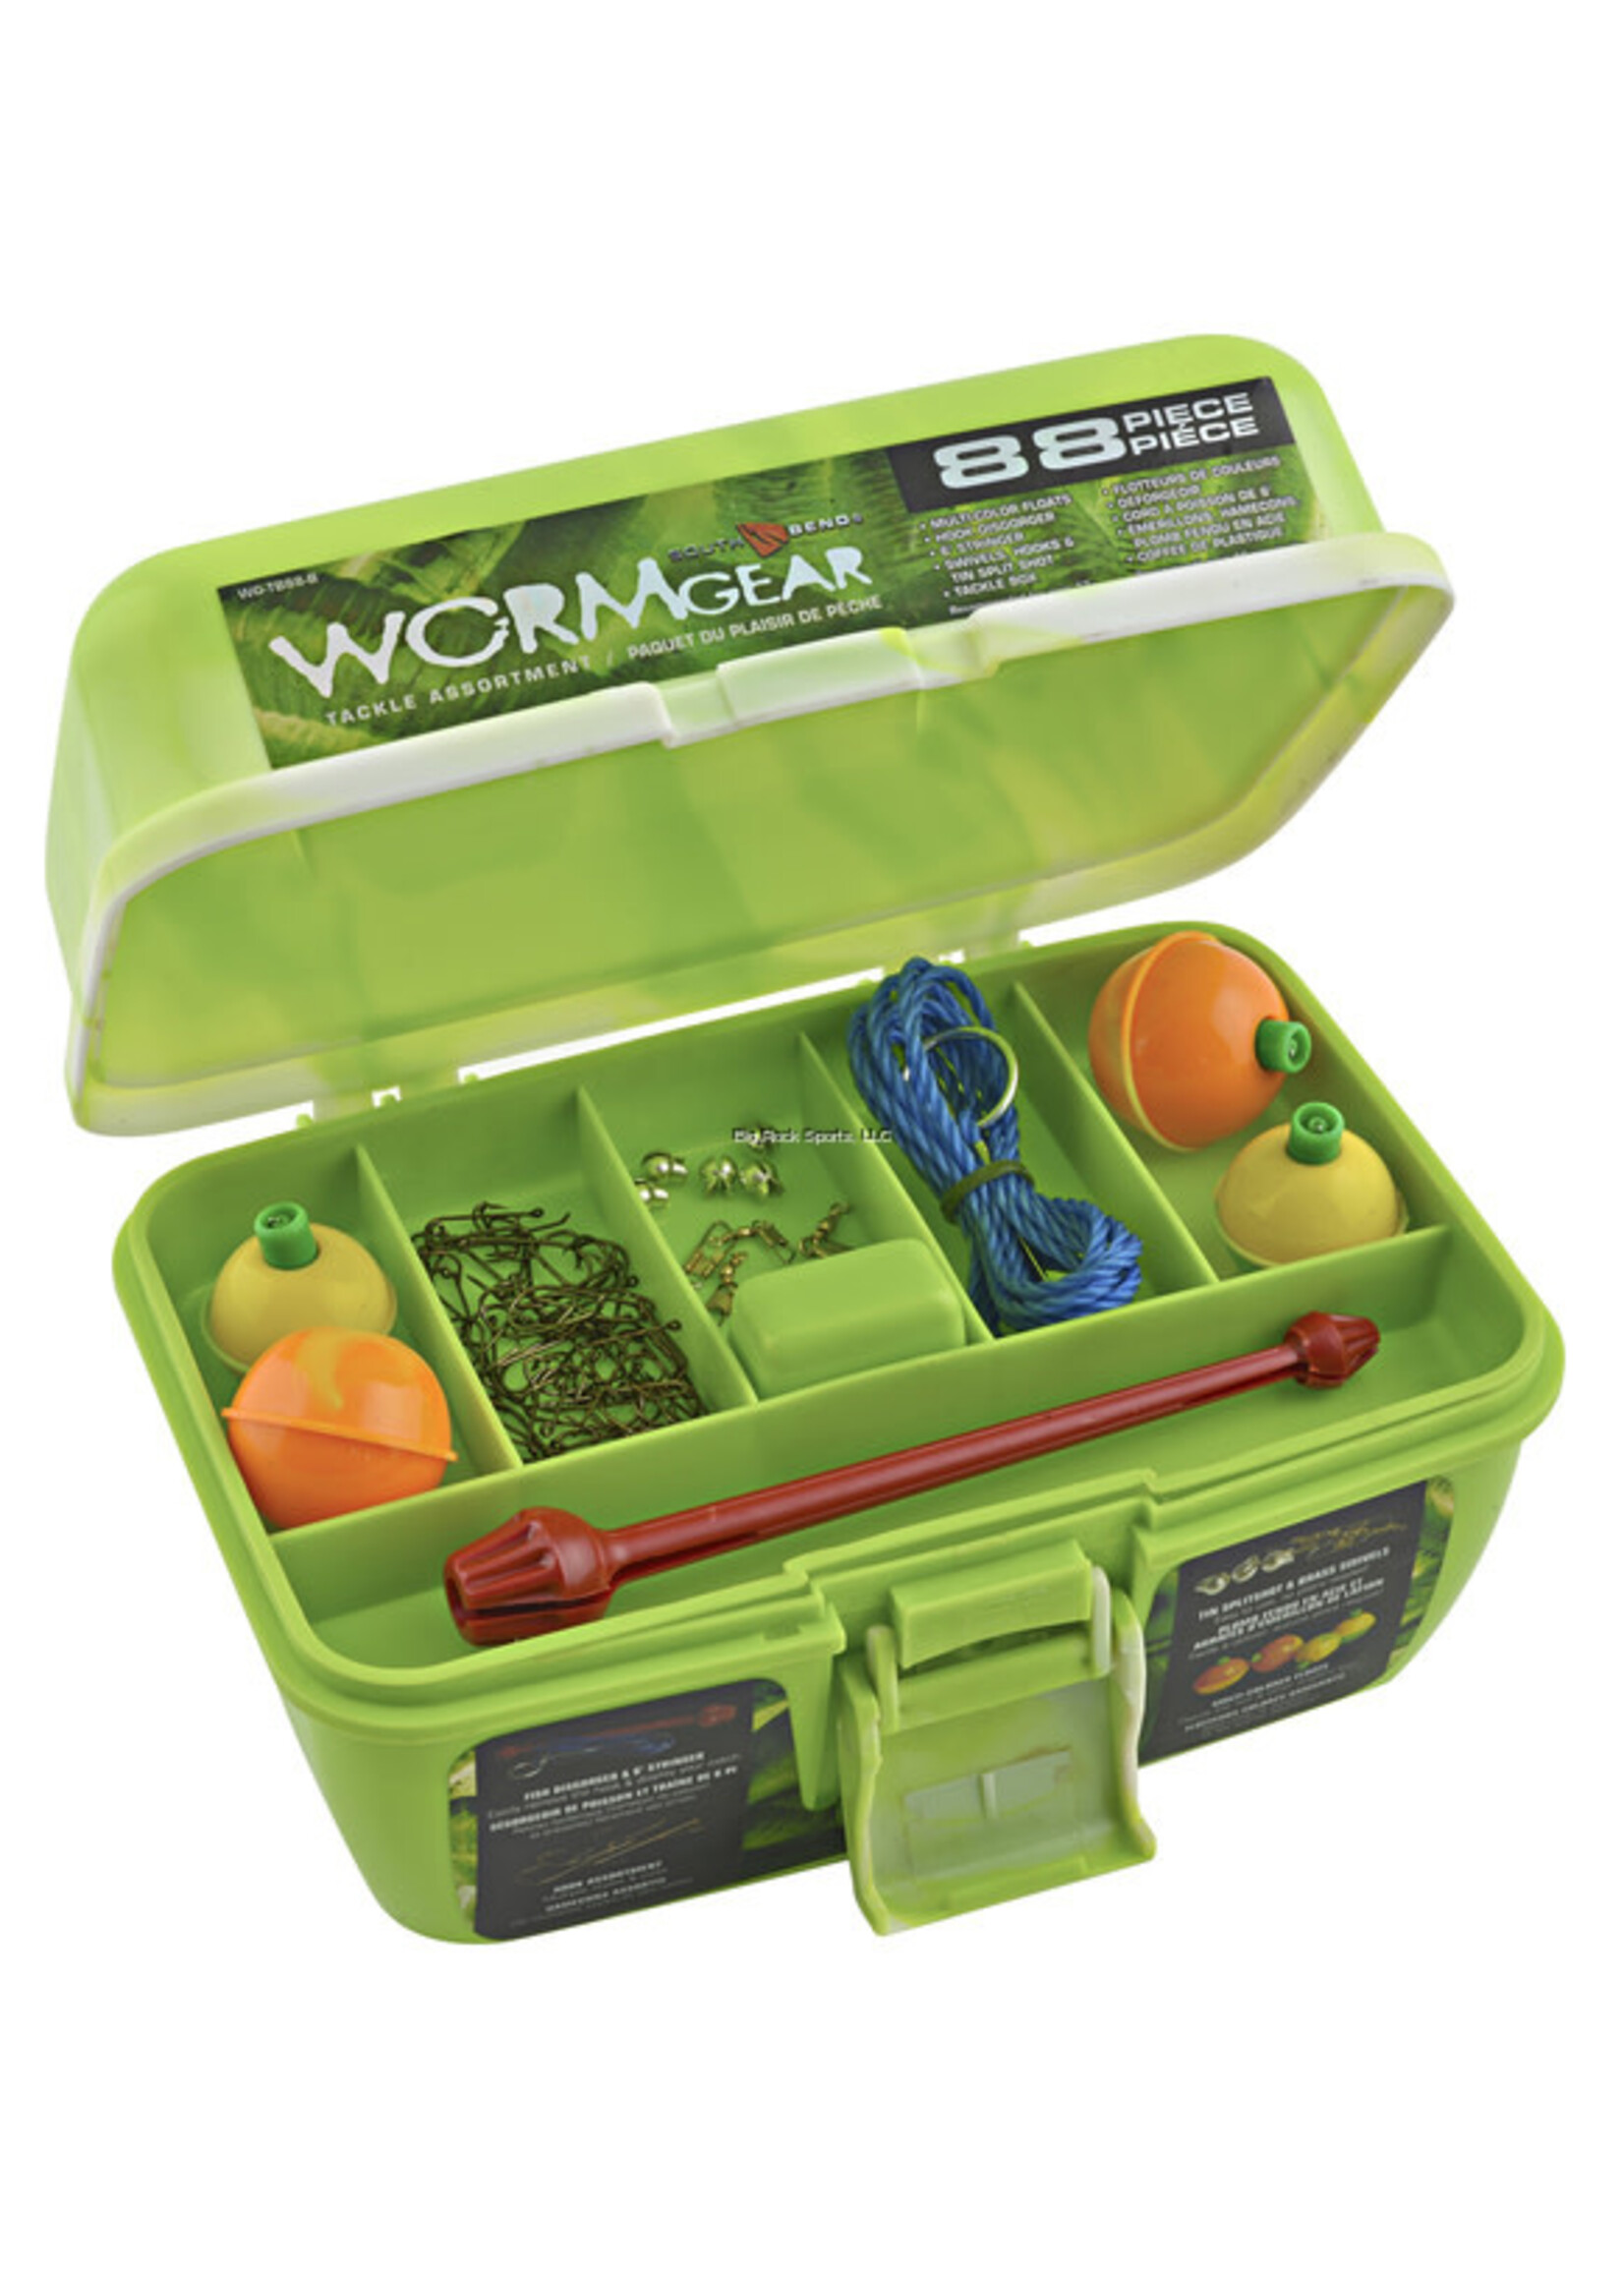 South Bend Worm Gear 88 Piece Loaded Tackle Box